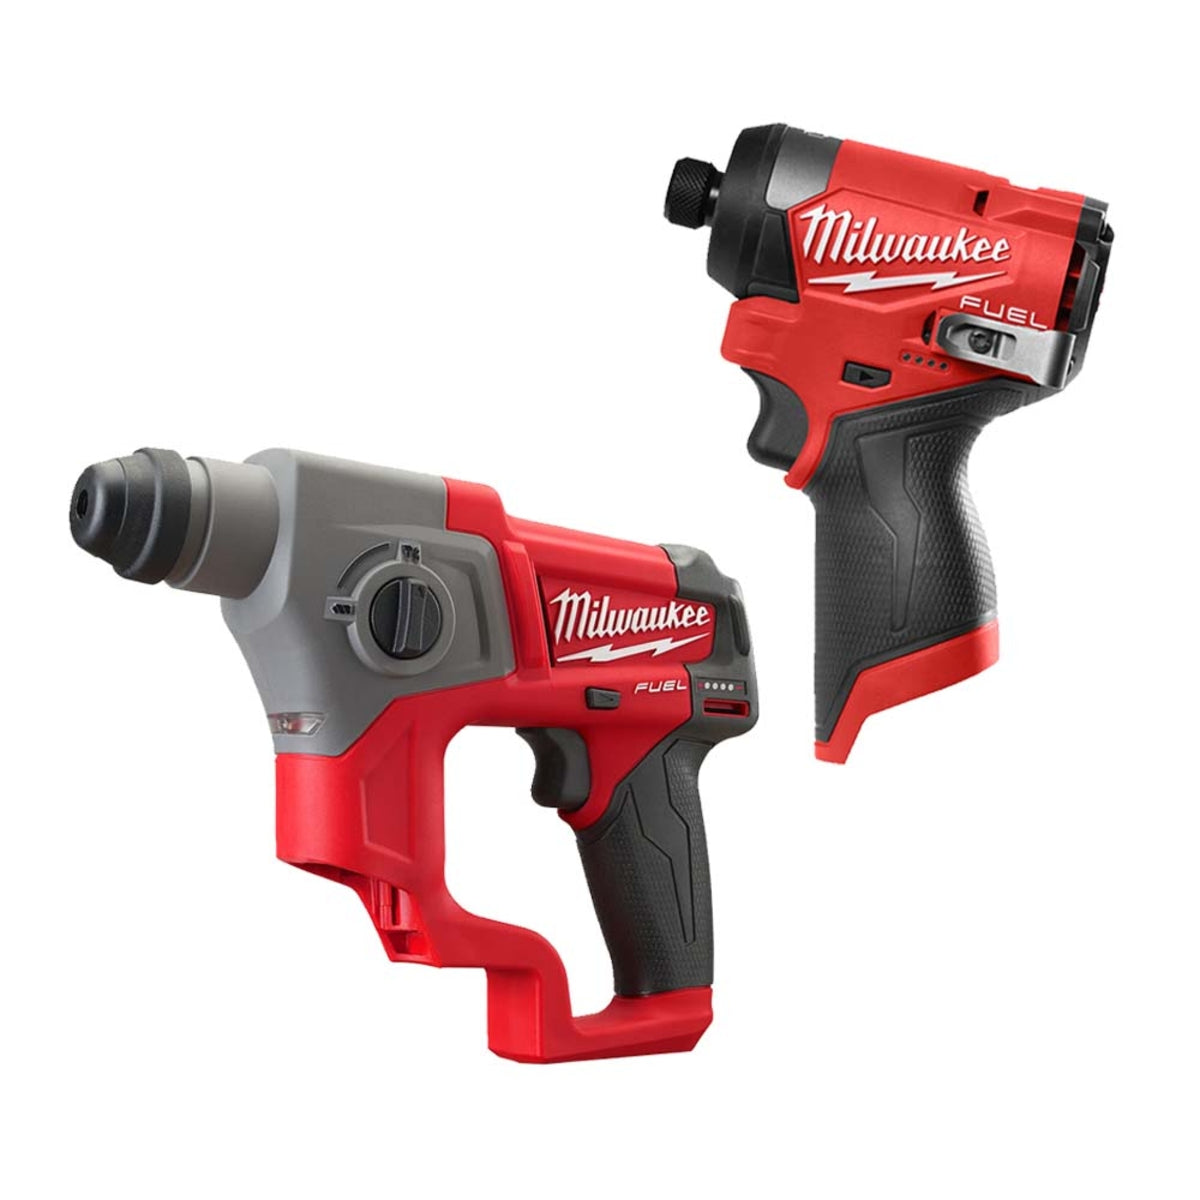 Milwaukee M12FPP2M2-5253X 12V Fuel Brushless SDS+ Drill & Impact Driver with 3 x Batteries Charger & Box 4933492639